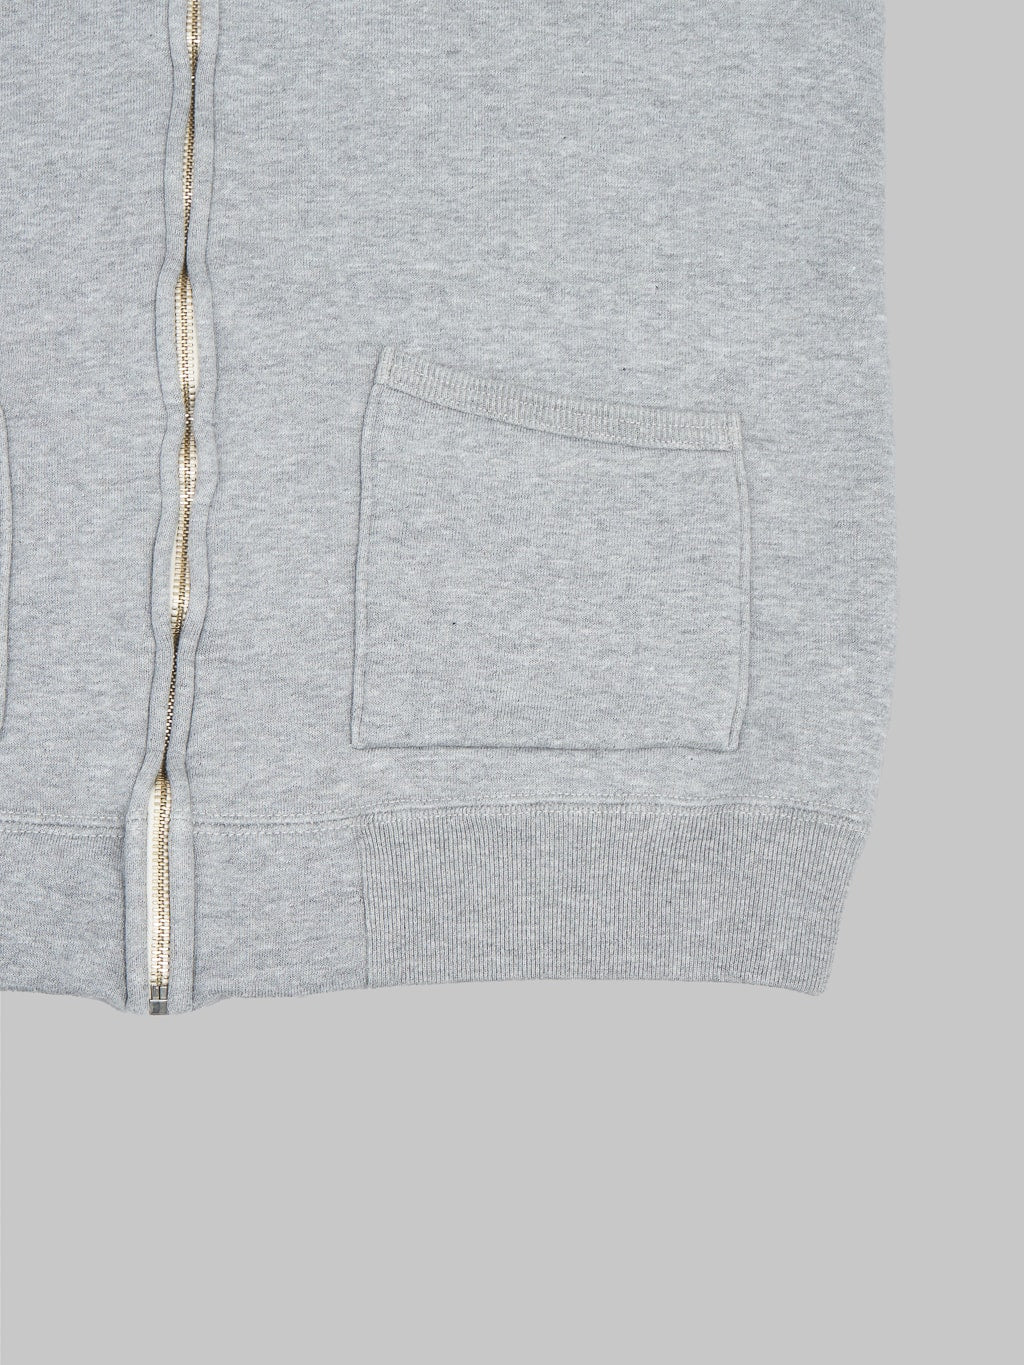 the strike gold zip hoodie grey front pockets